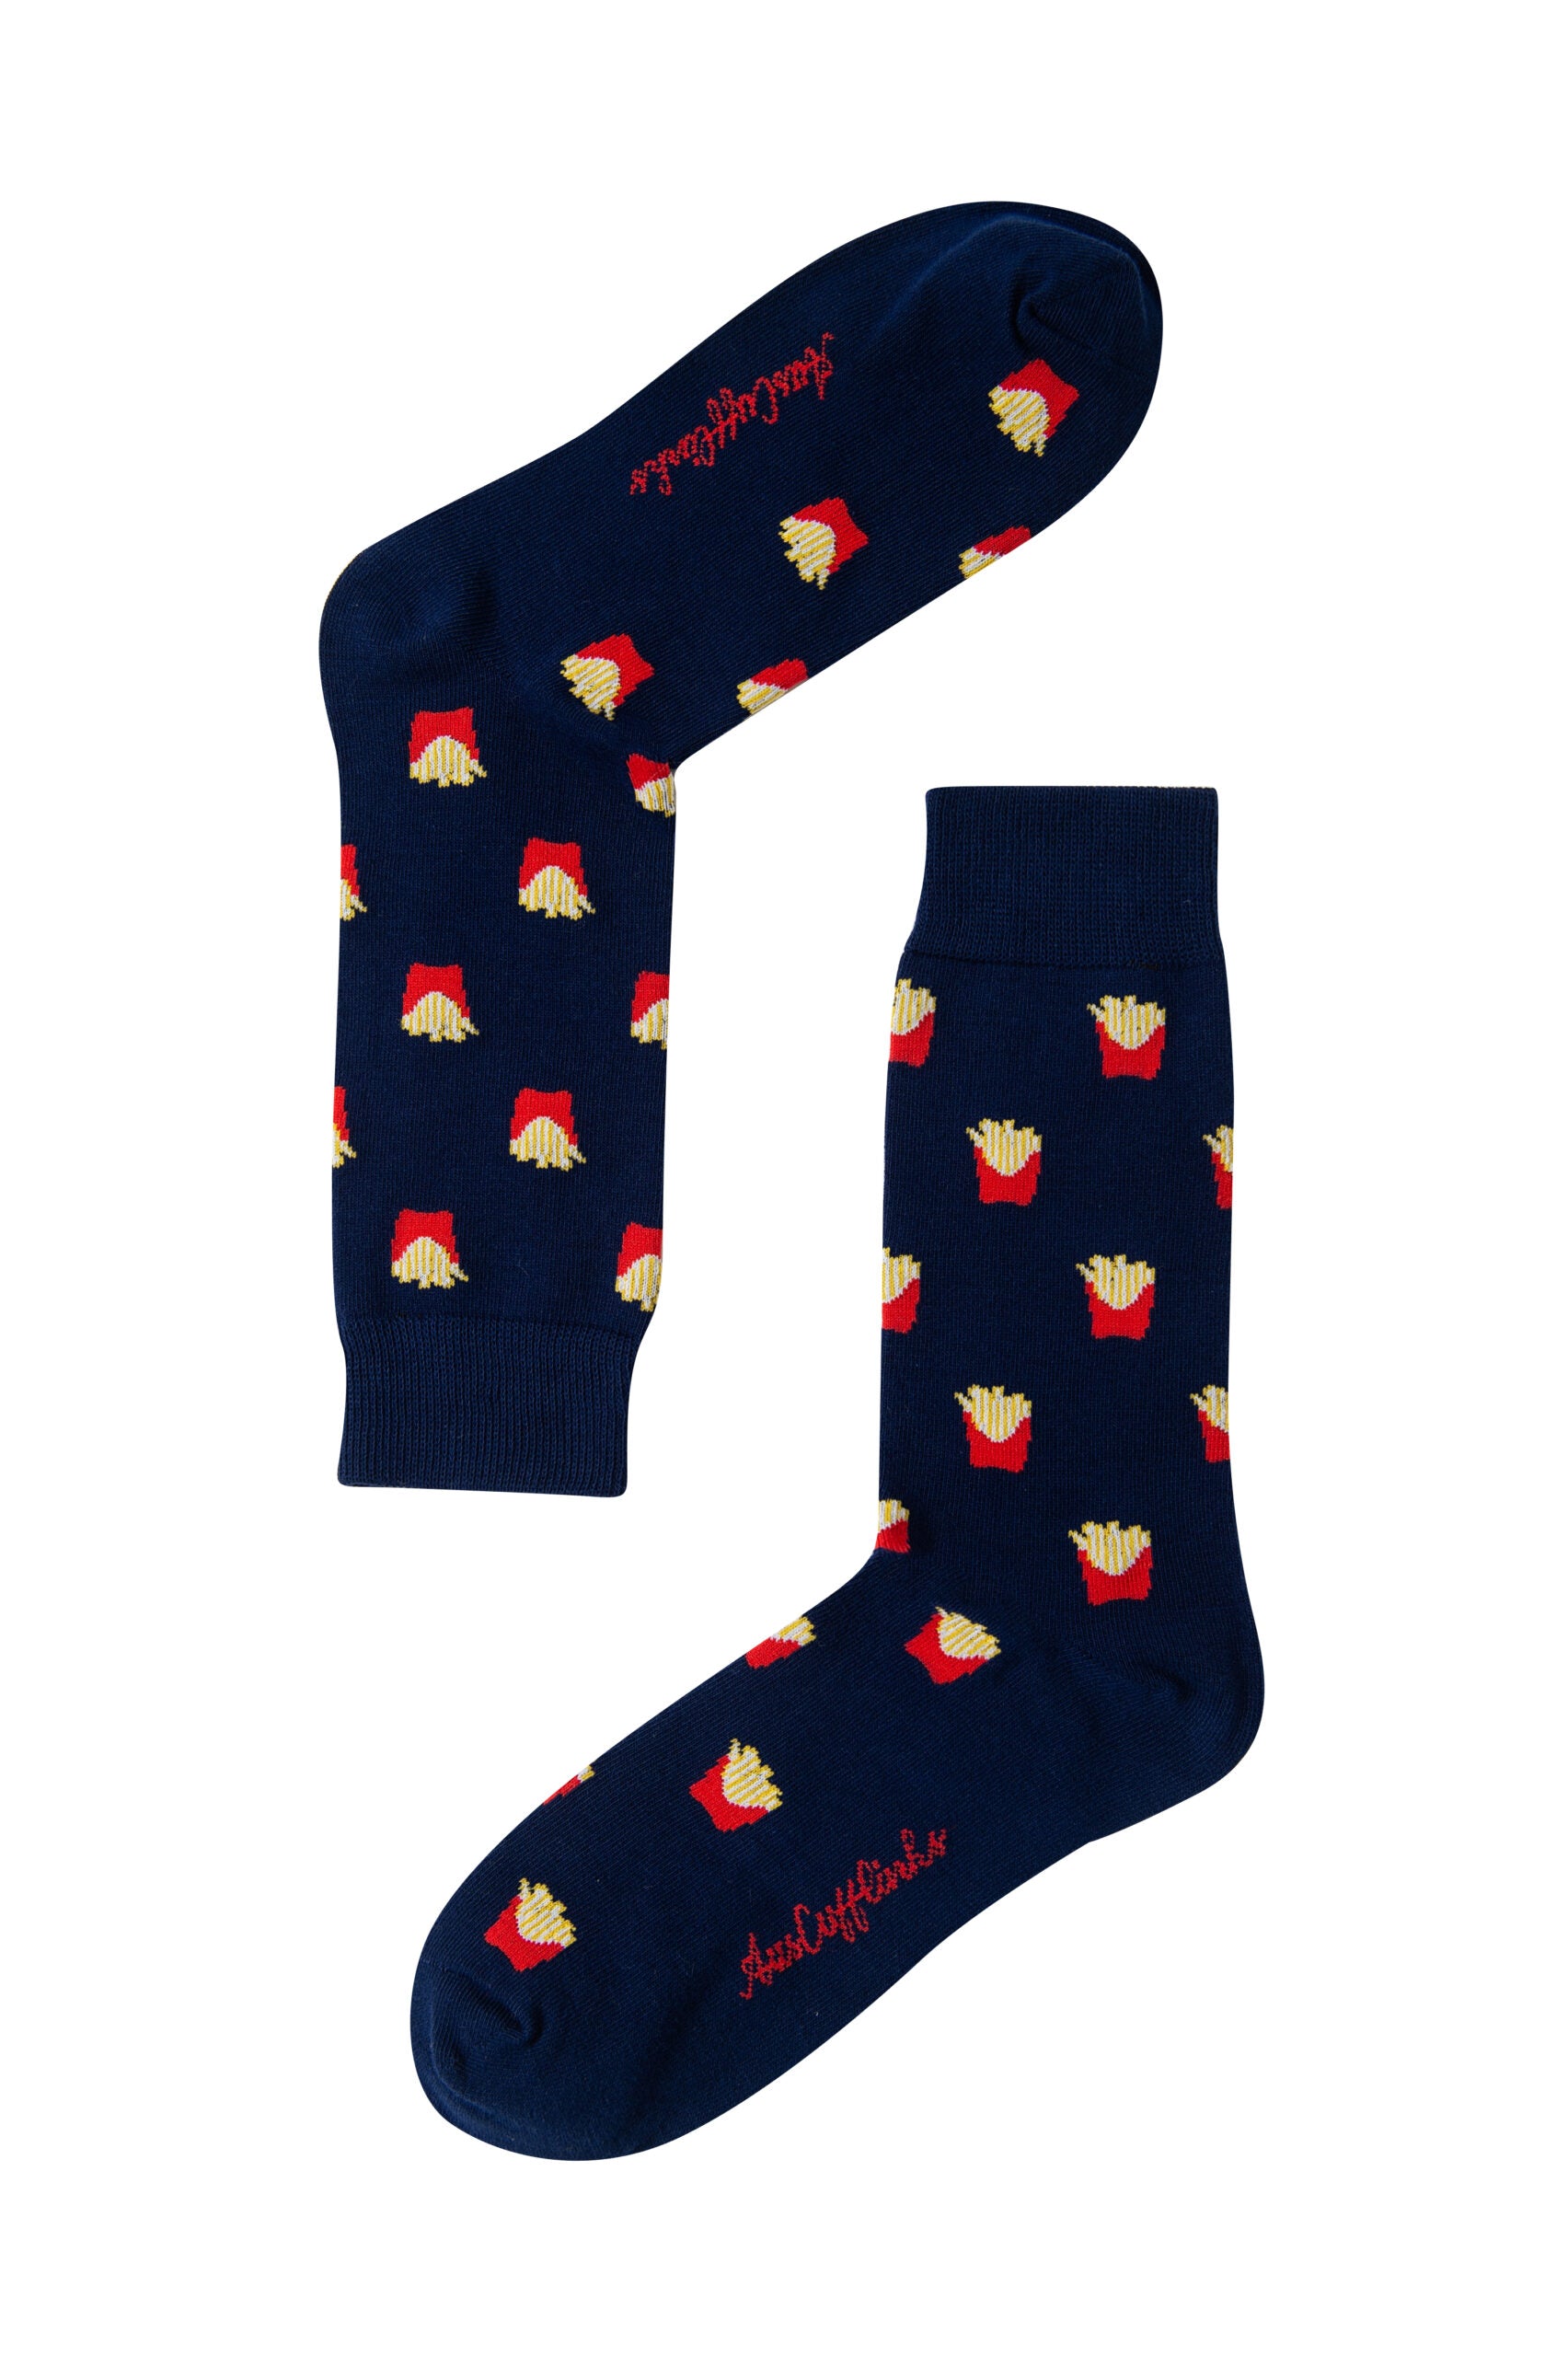 A pair of Fries Socks with french fries as a pattern.